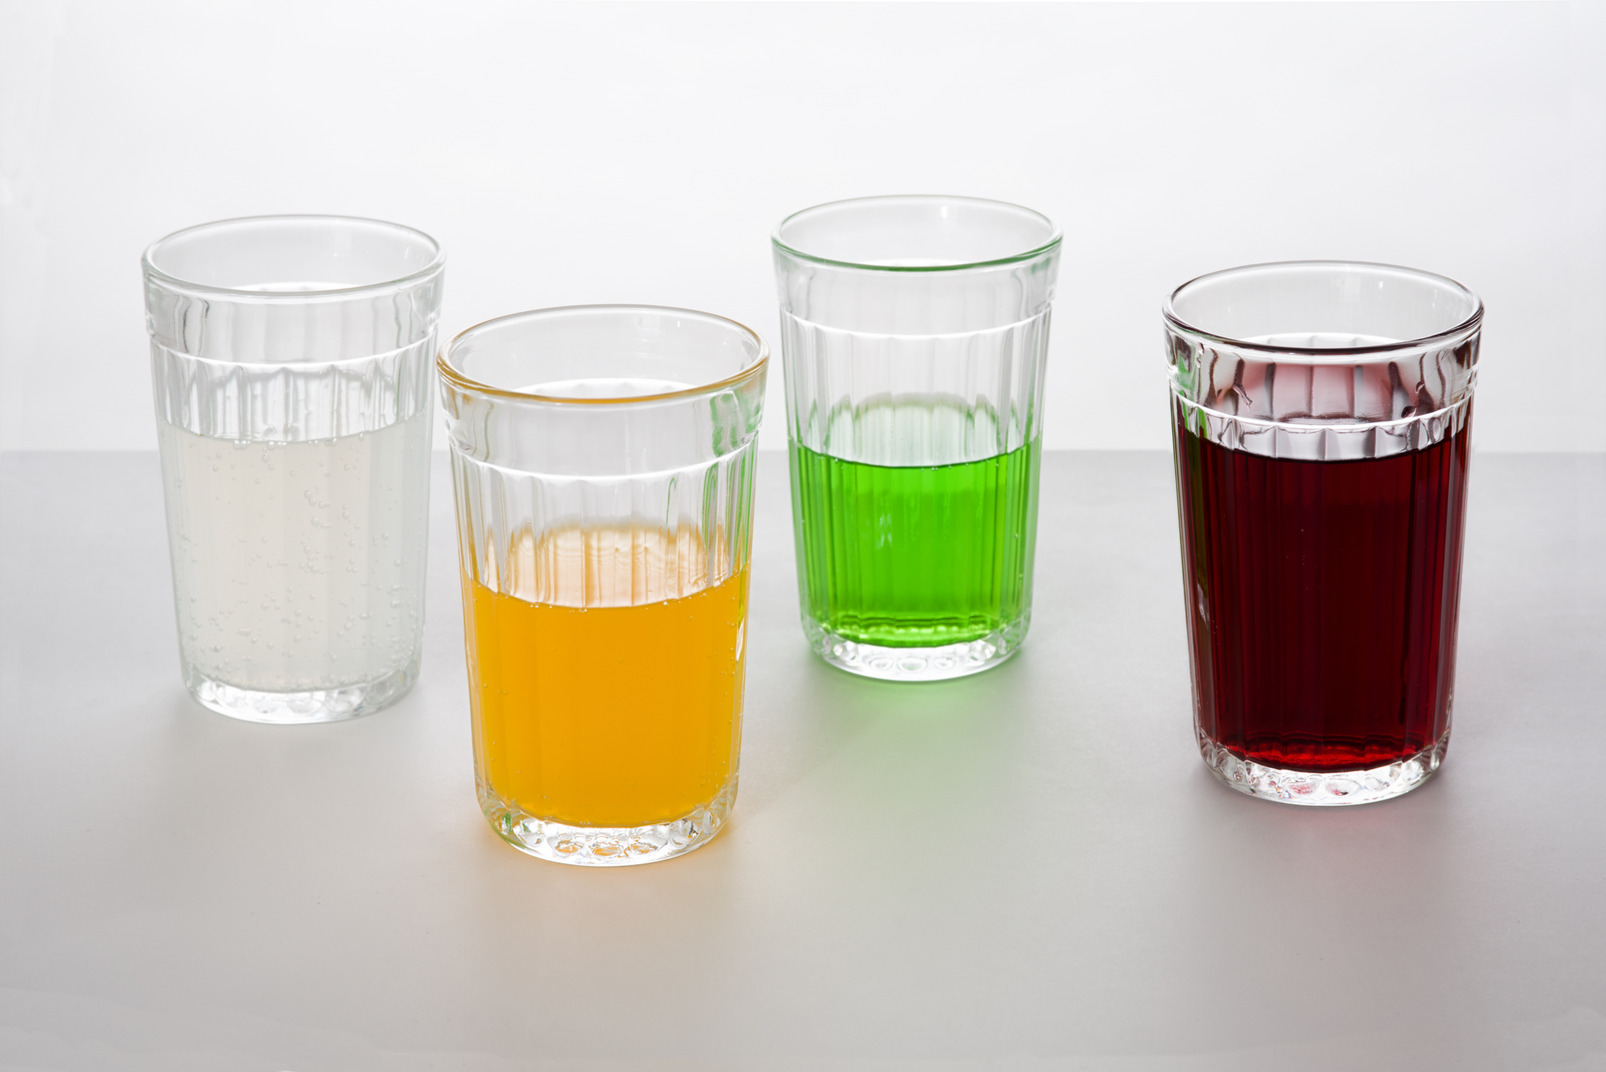 Multicolored chemical solutions